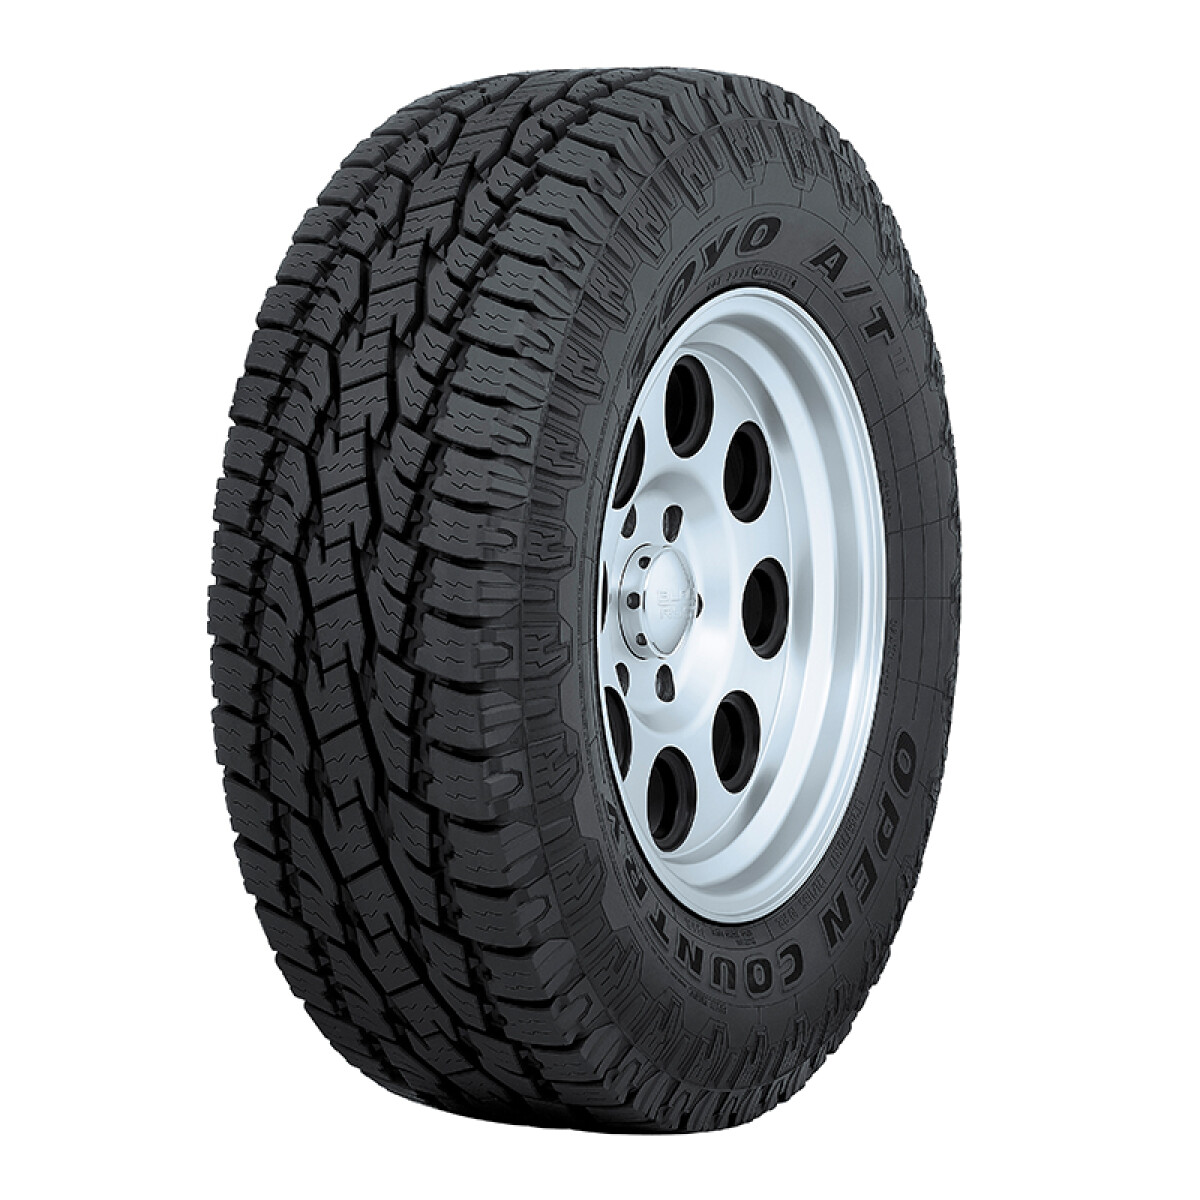 CUBIERTA NEUMATICO TOYO OPEN COUNTRY AT2 LT235/70R16 110R 